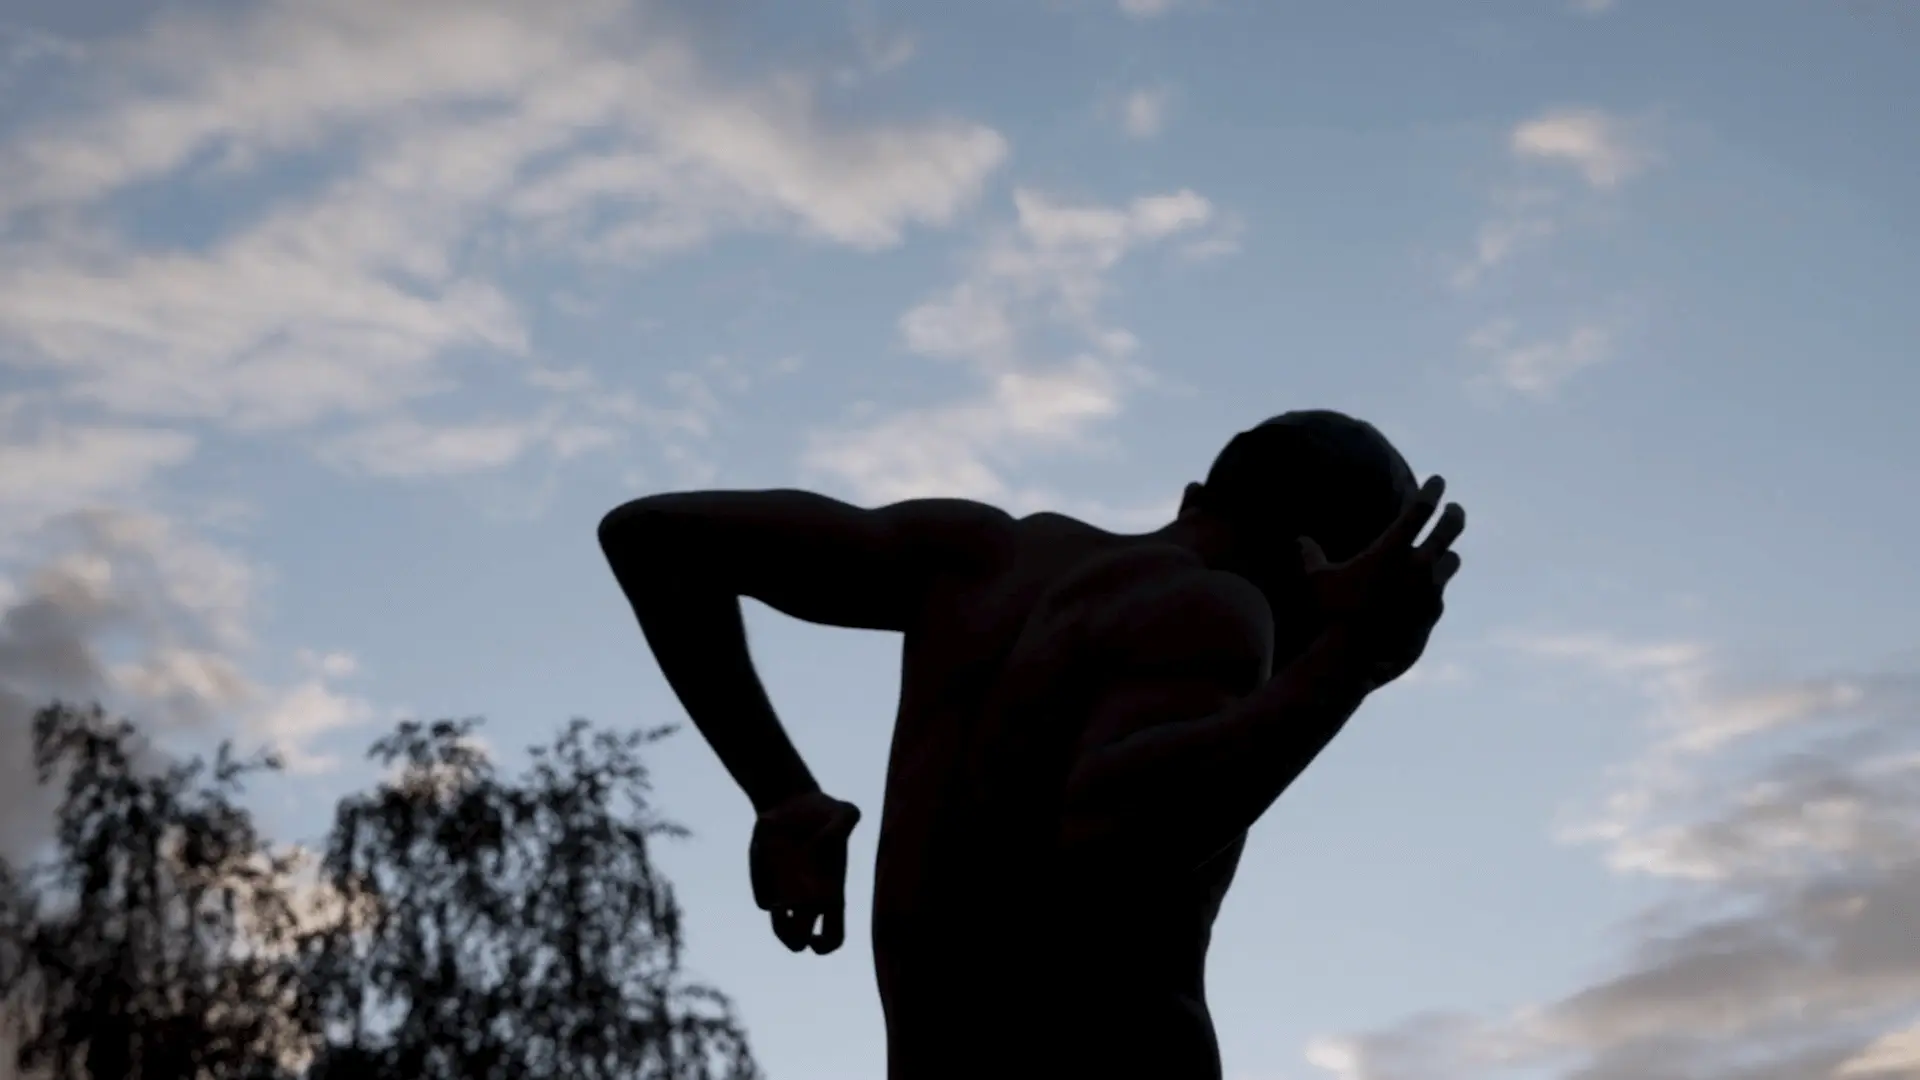 Screenshot from spokenword film 'Bodies' directed by Davy Lazare. Image depicts a man performing an expressive dance to the backdrop of a morning's sky.